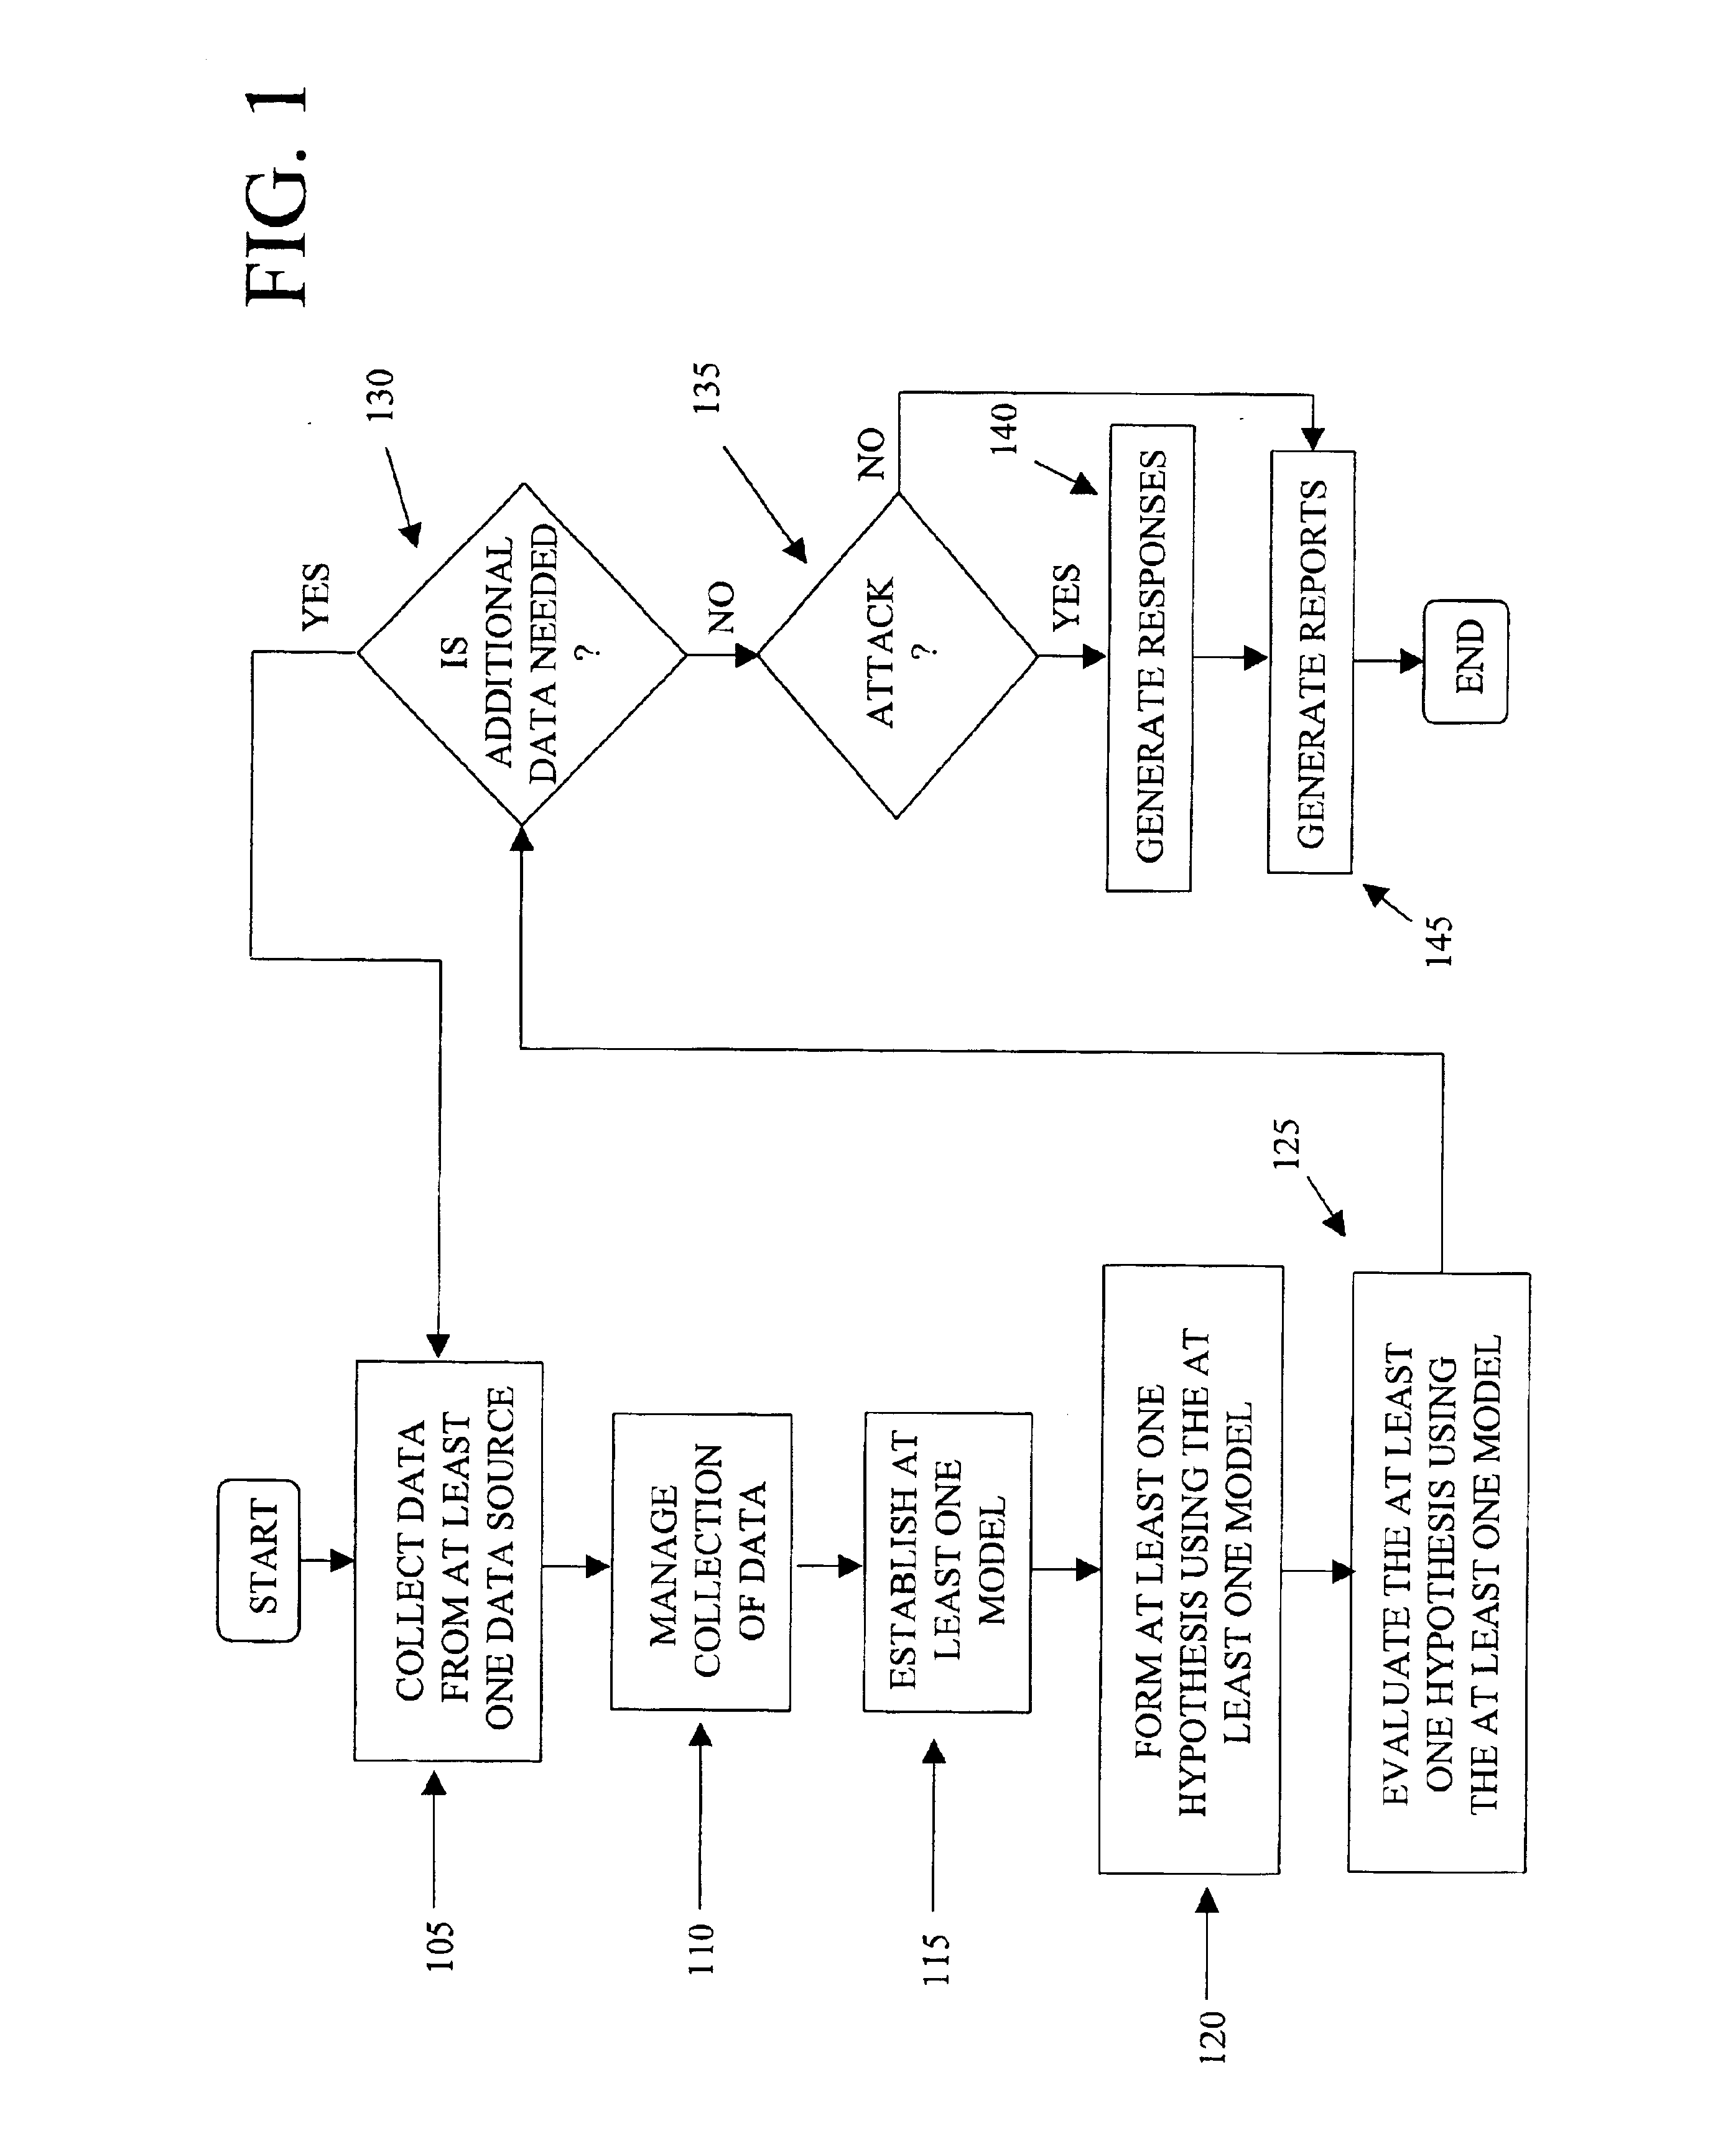 Method and system for assessing attacks on computer networks using Bayesian networks